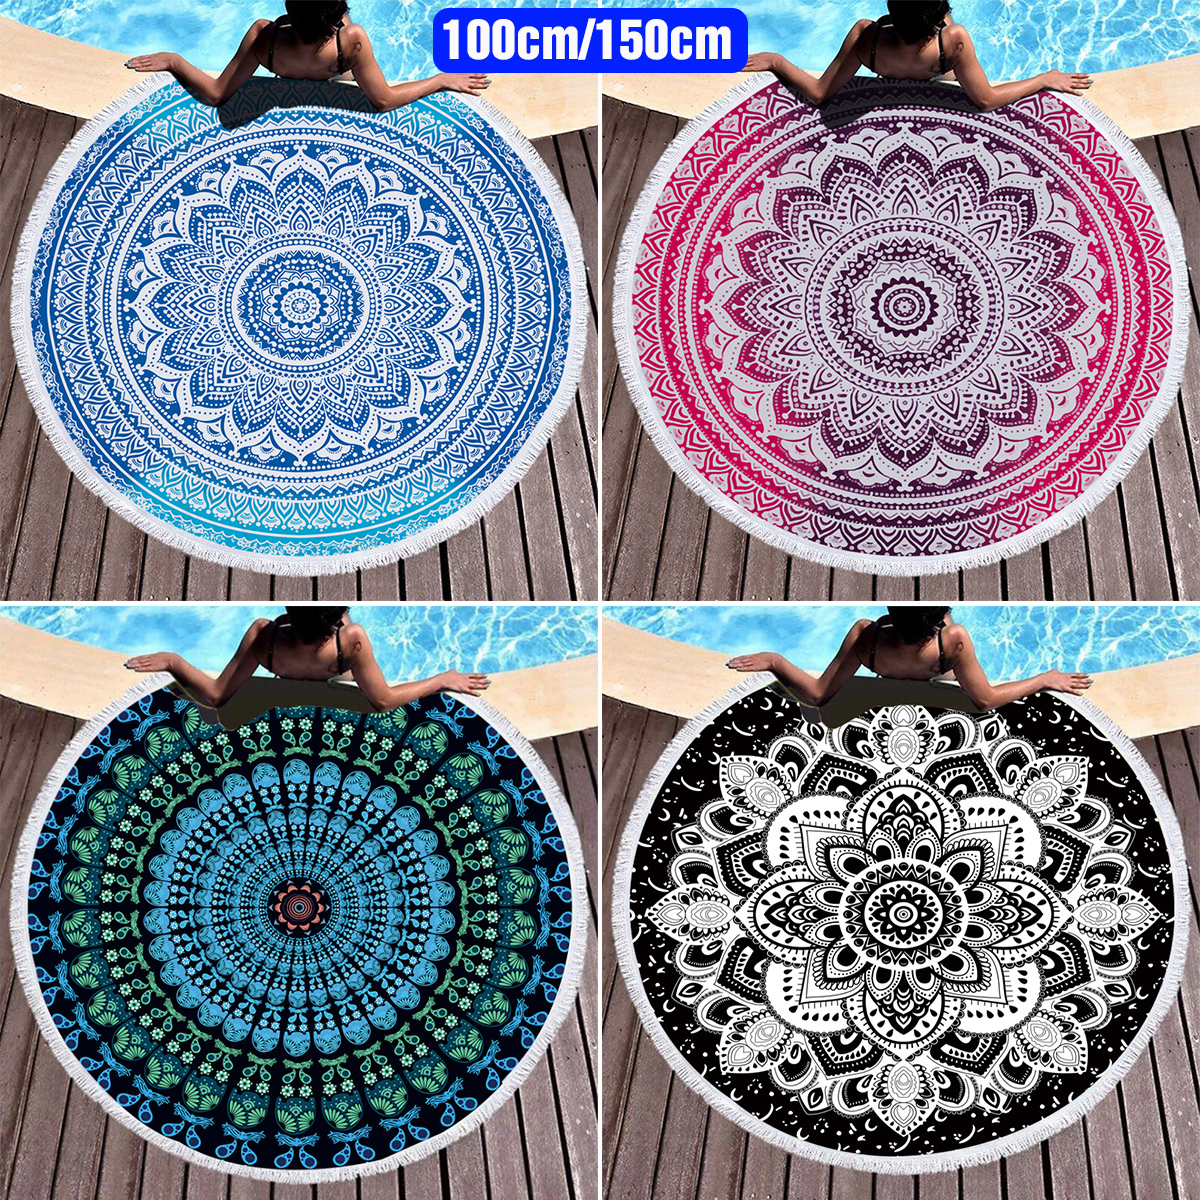 1M15M-Round-Beach-Towel-Tassel-Tapestry-Yoga-Mats-Blankets-Home-Fitness-Decoration-Accessories-1678169-1